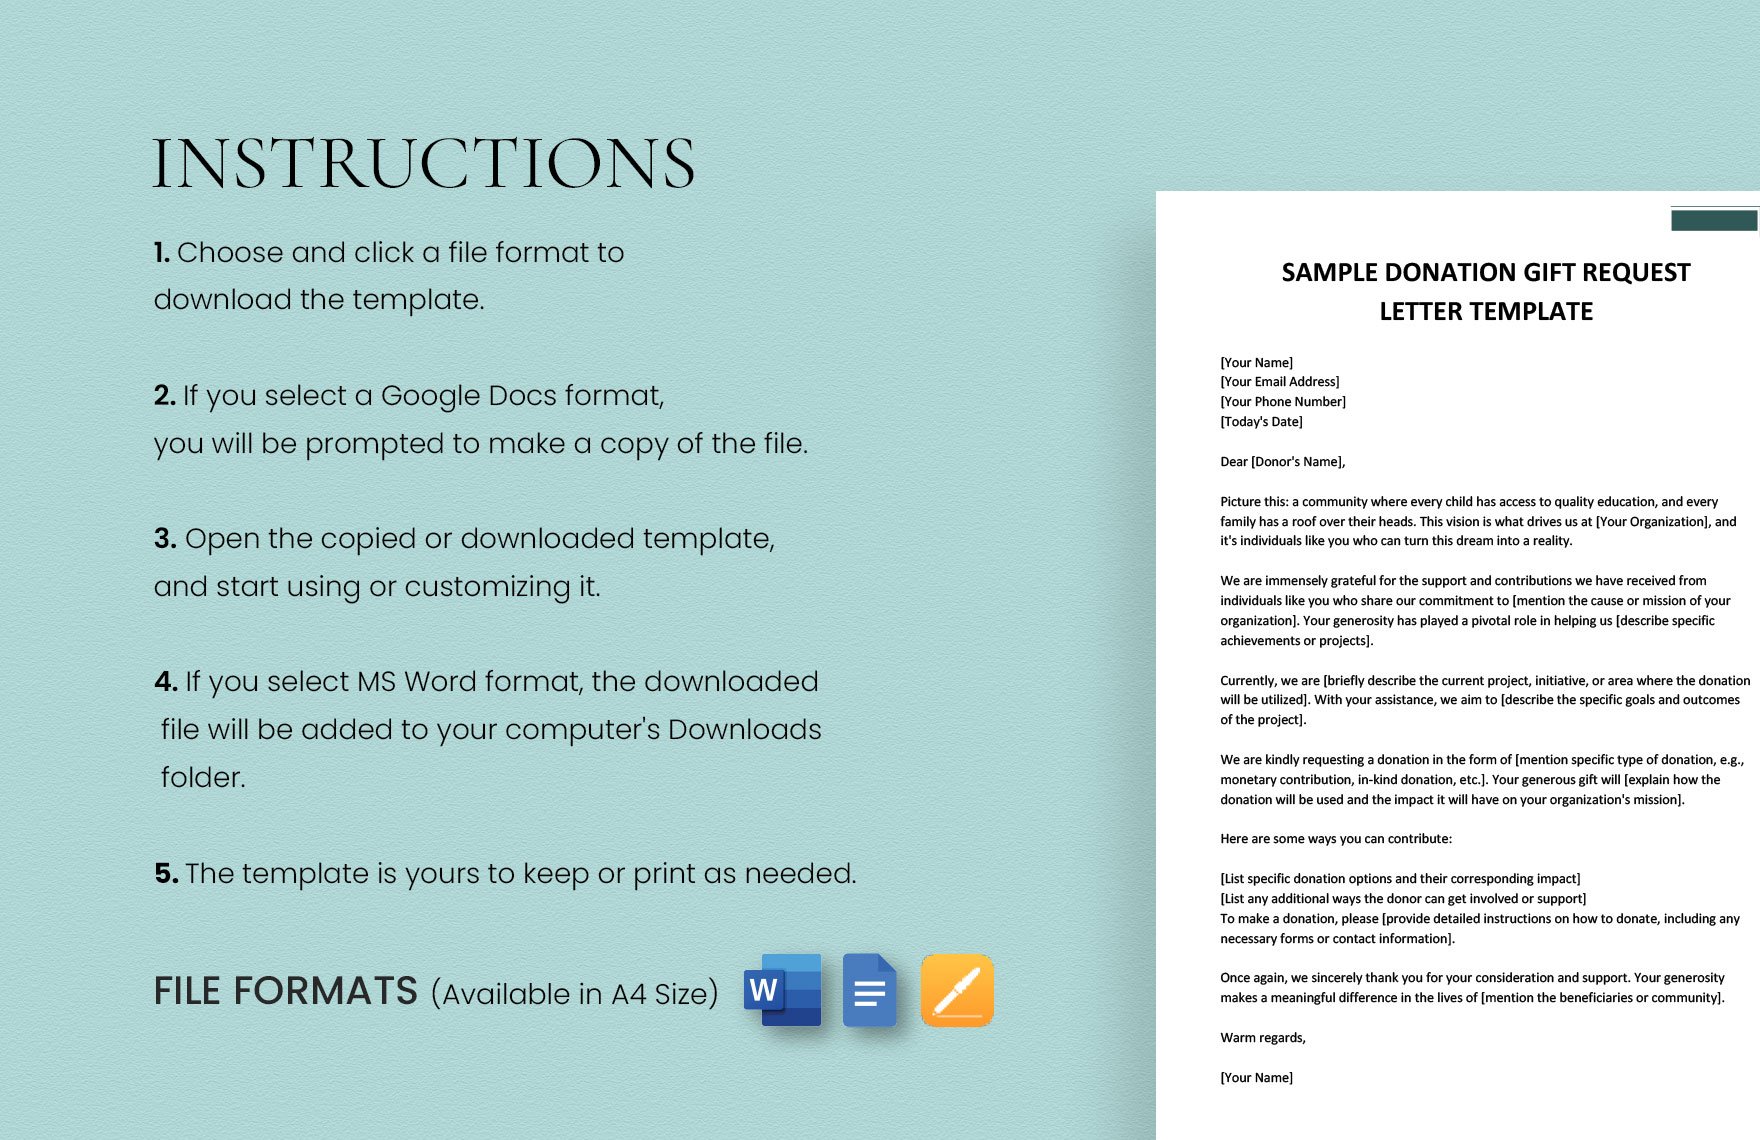 Sample Donation/Gift Request Letter Template